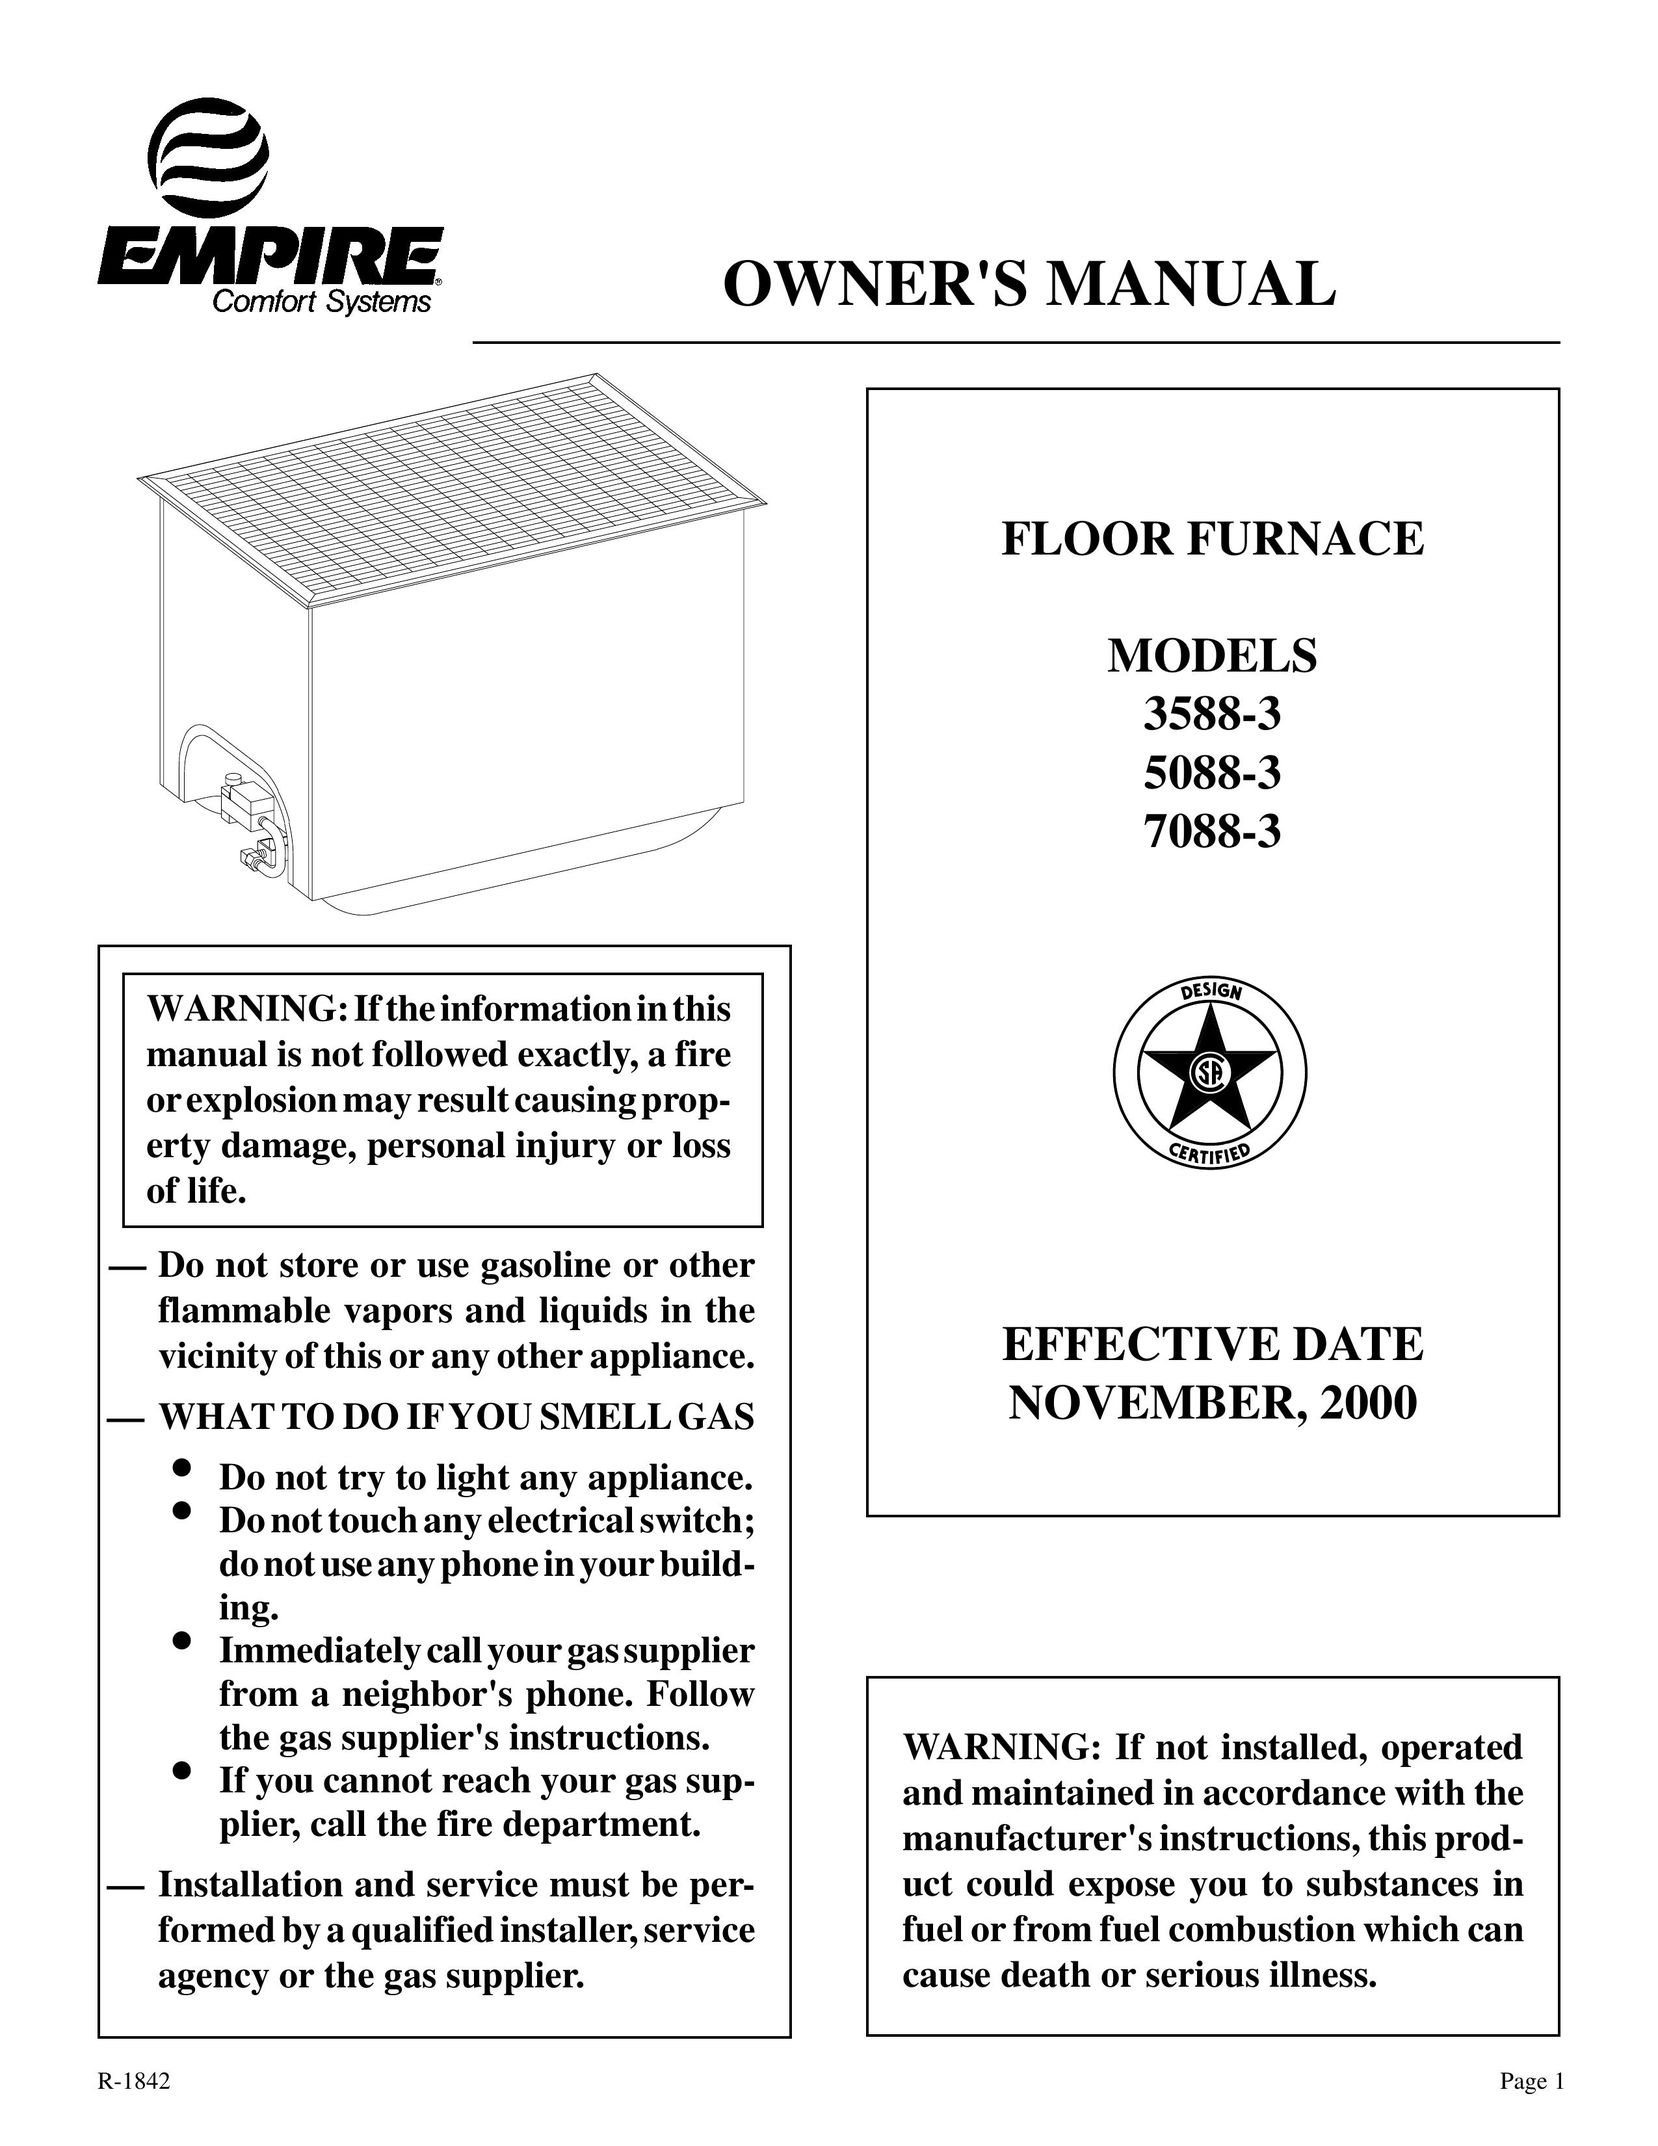 Empire Comfort Systems 7088-3 Furnace User Manual